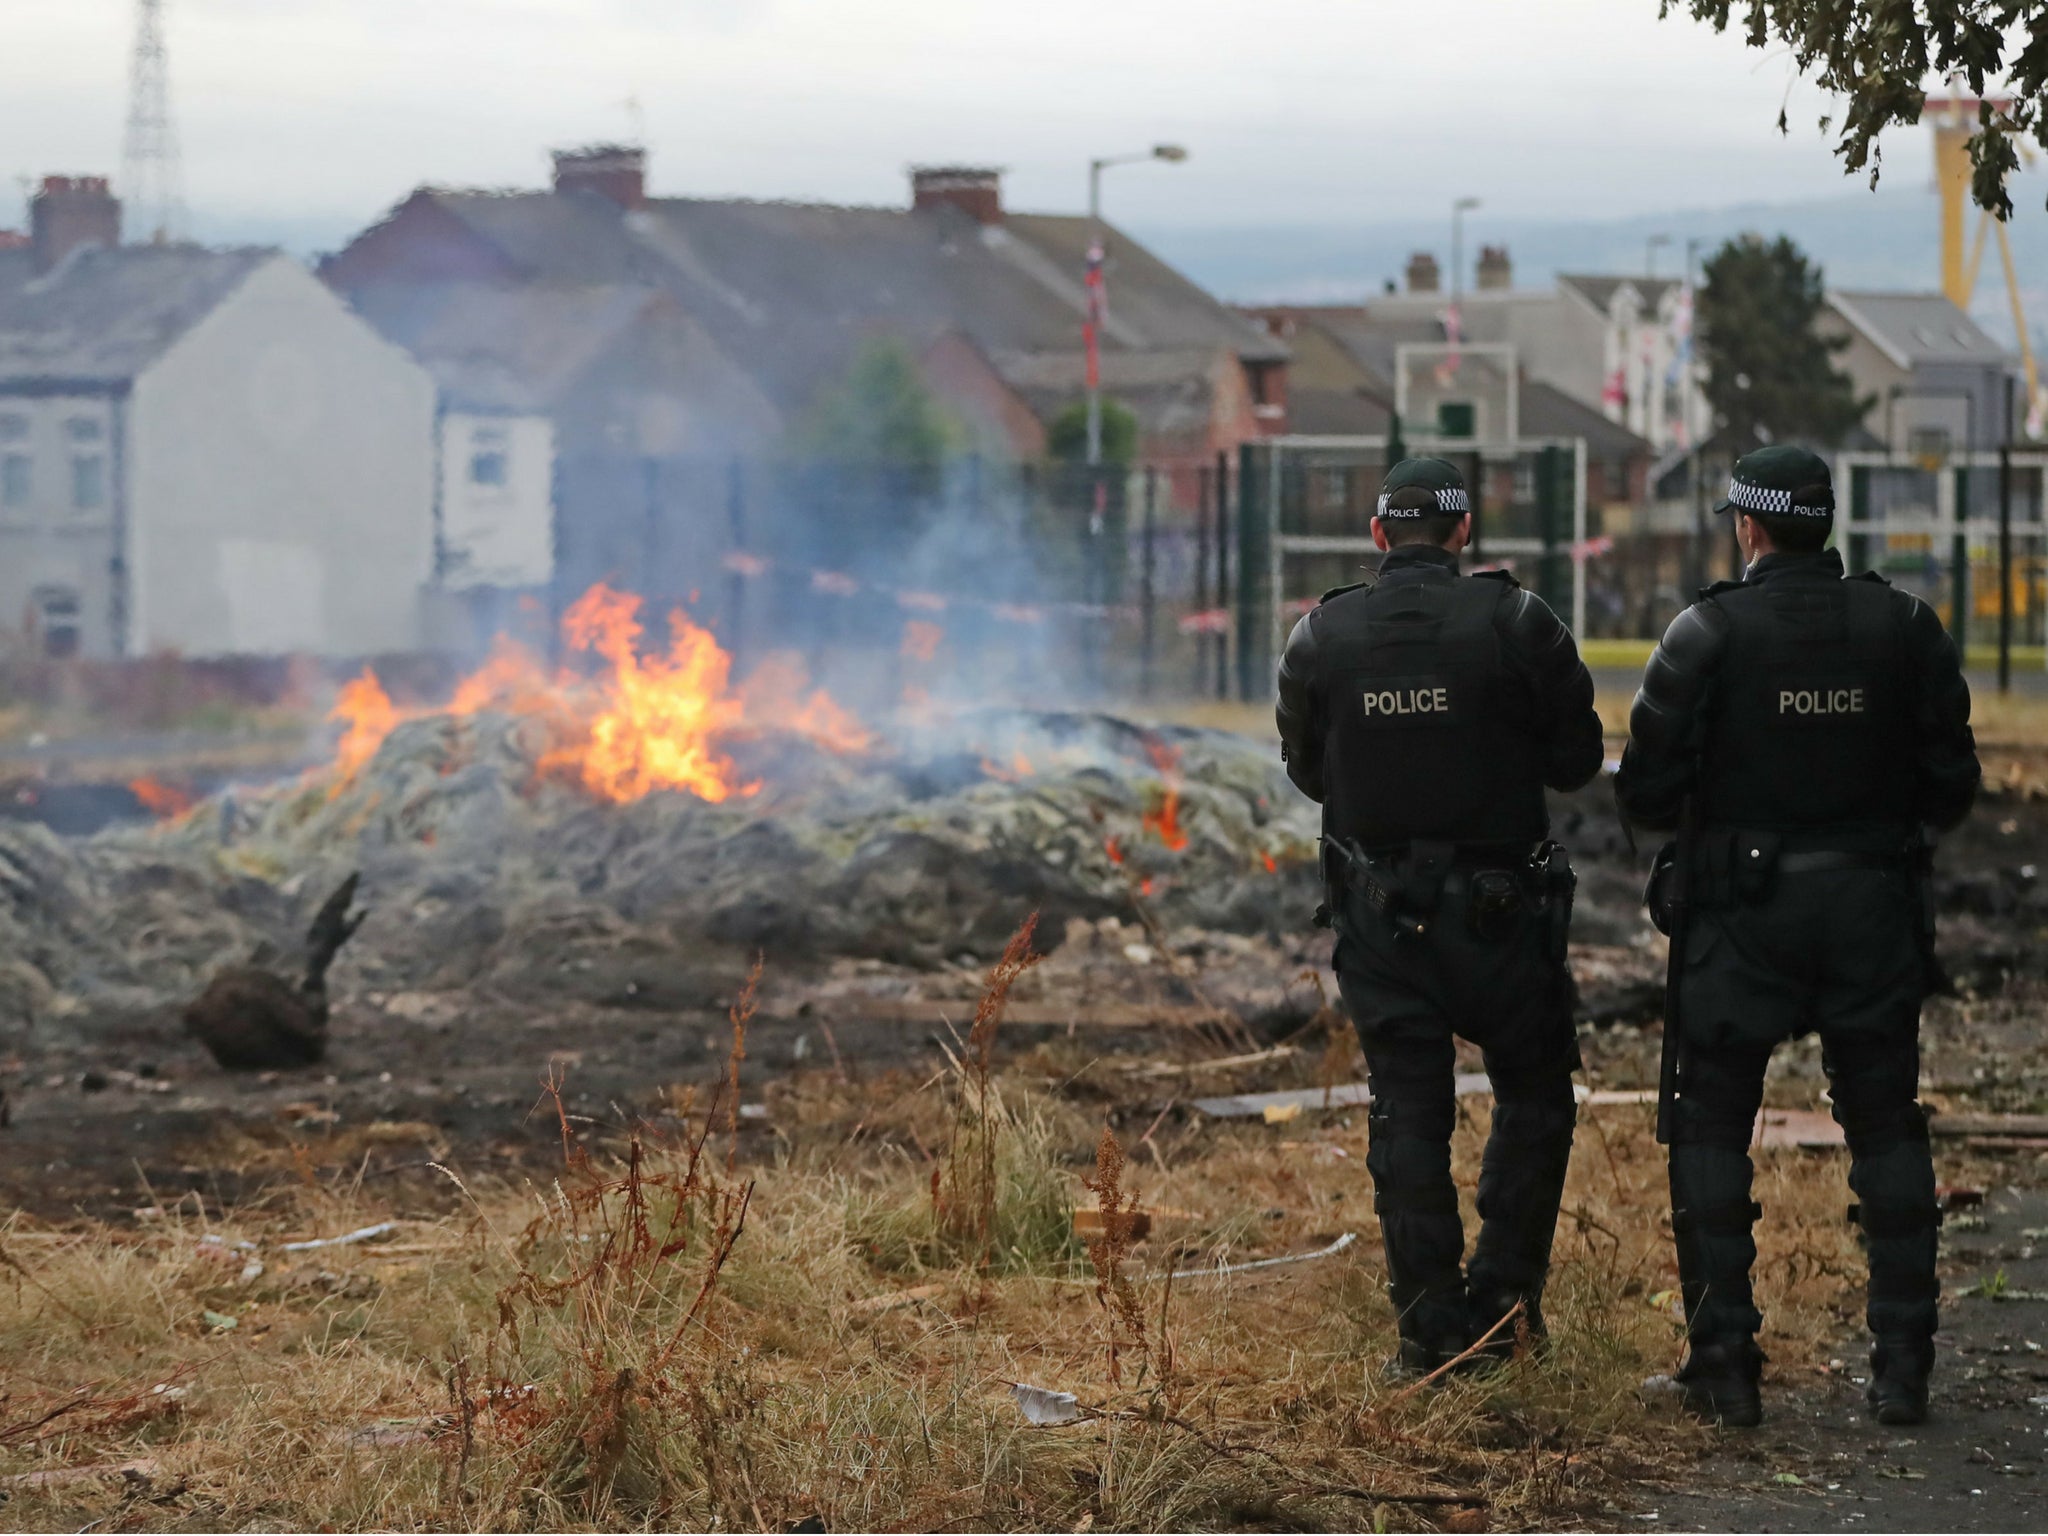 Contractors flanked by police dismantled two pyres in east Belfast on Wednesday